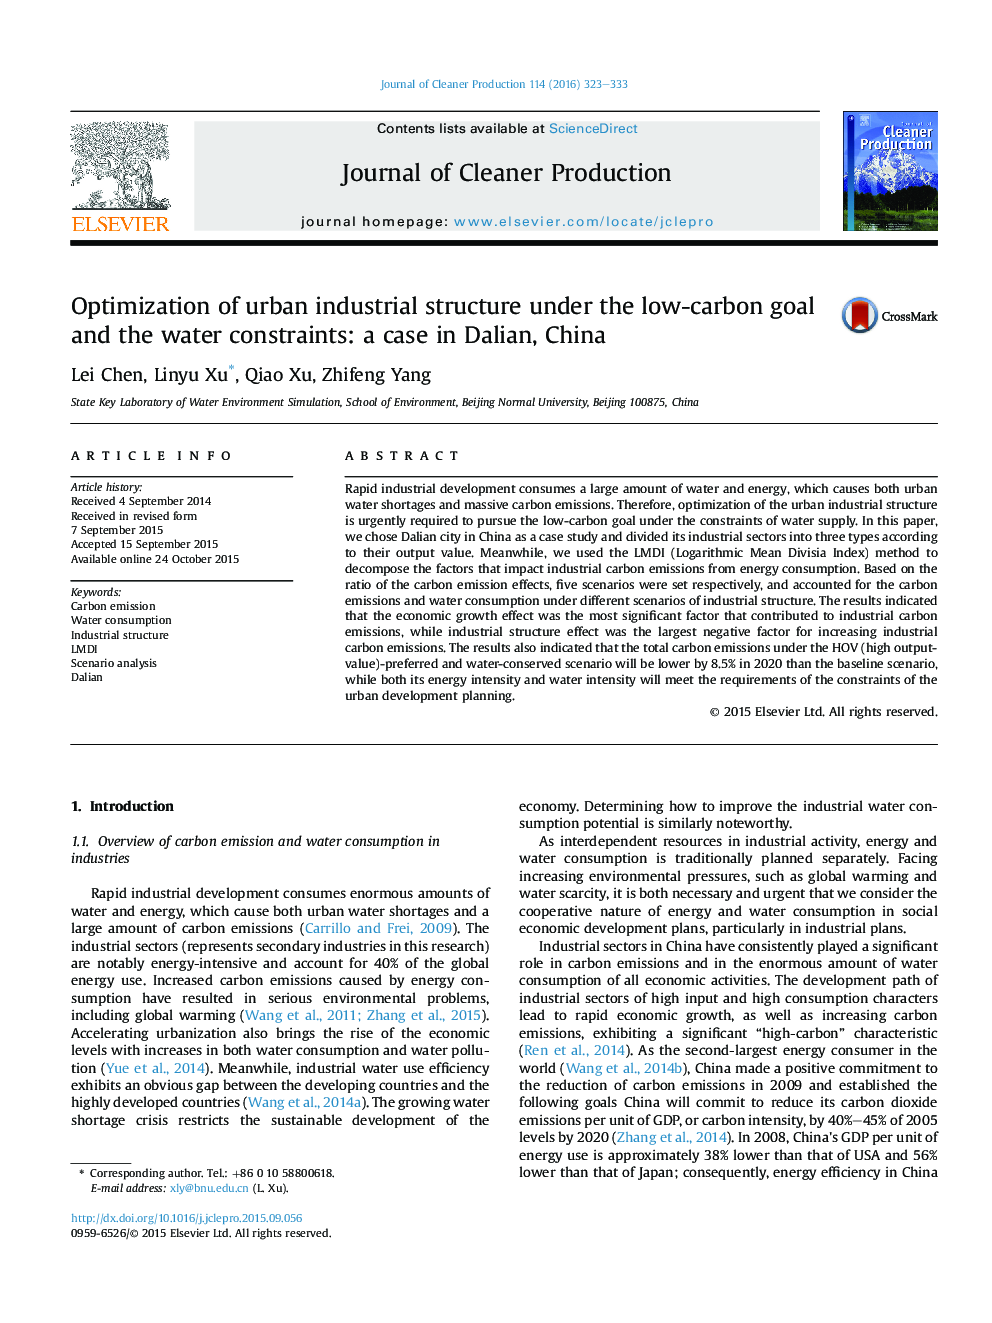 Optimization of urban industrial structure under the low-carbon goal and the water constraints: a case in Dalian, China